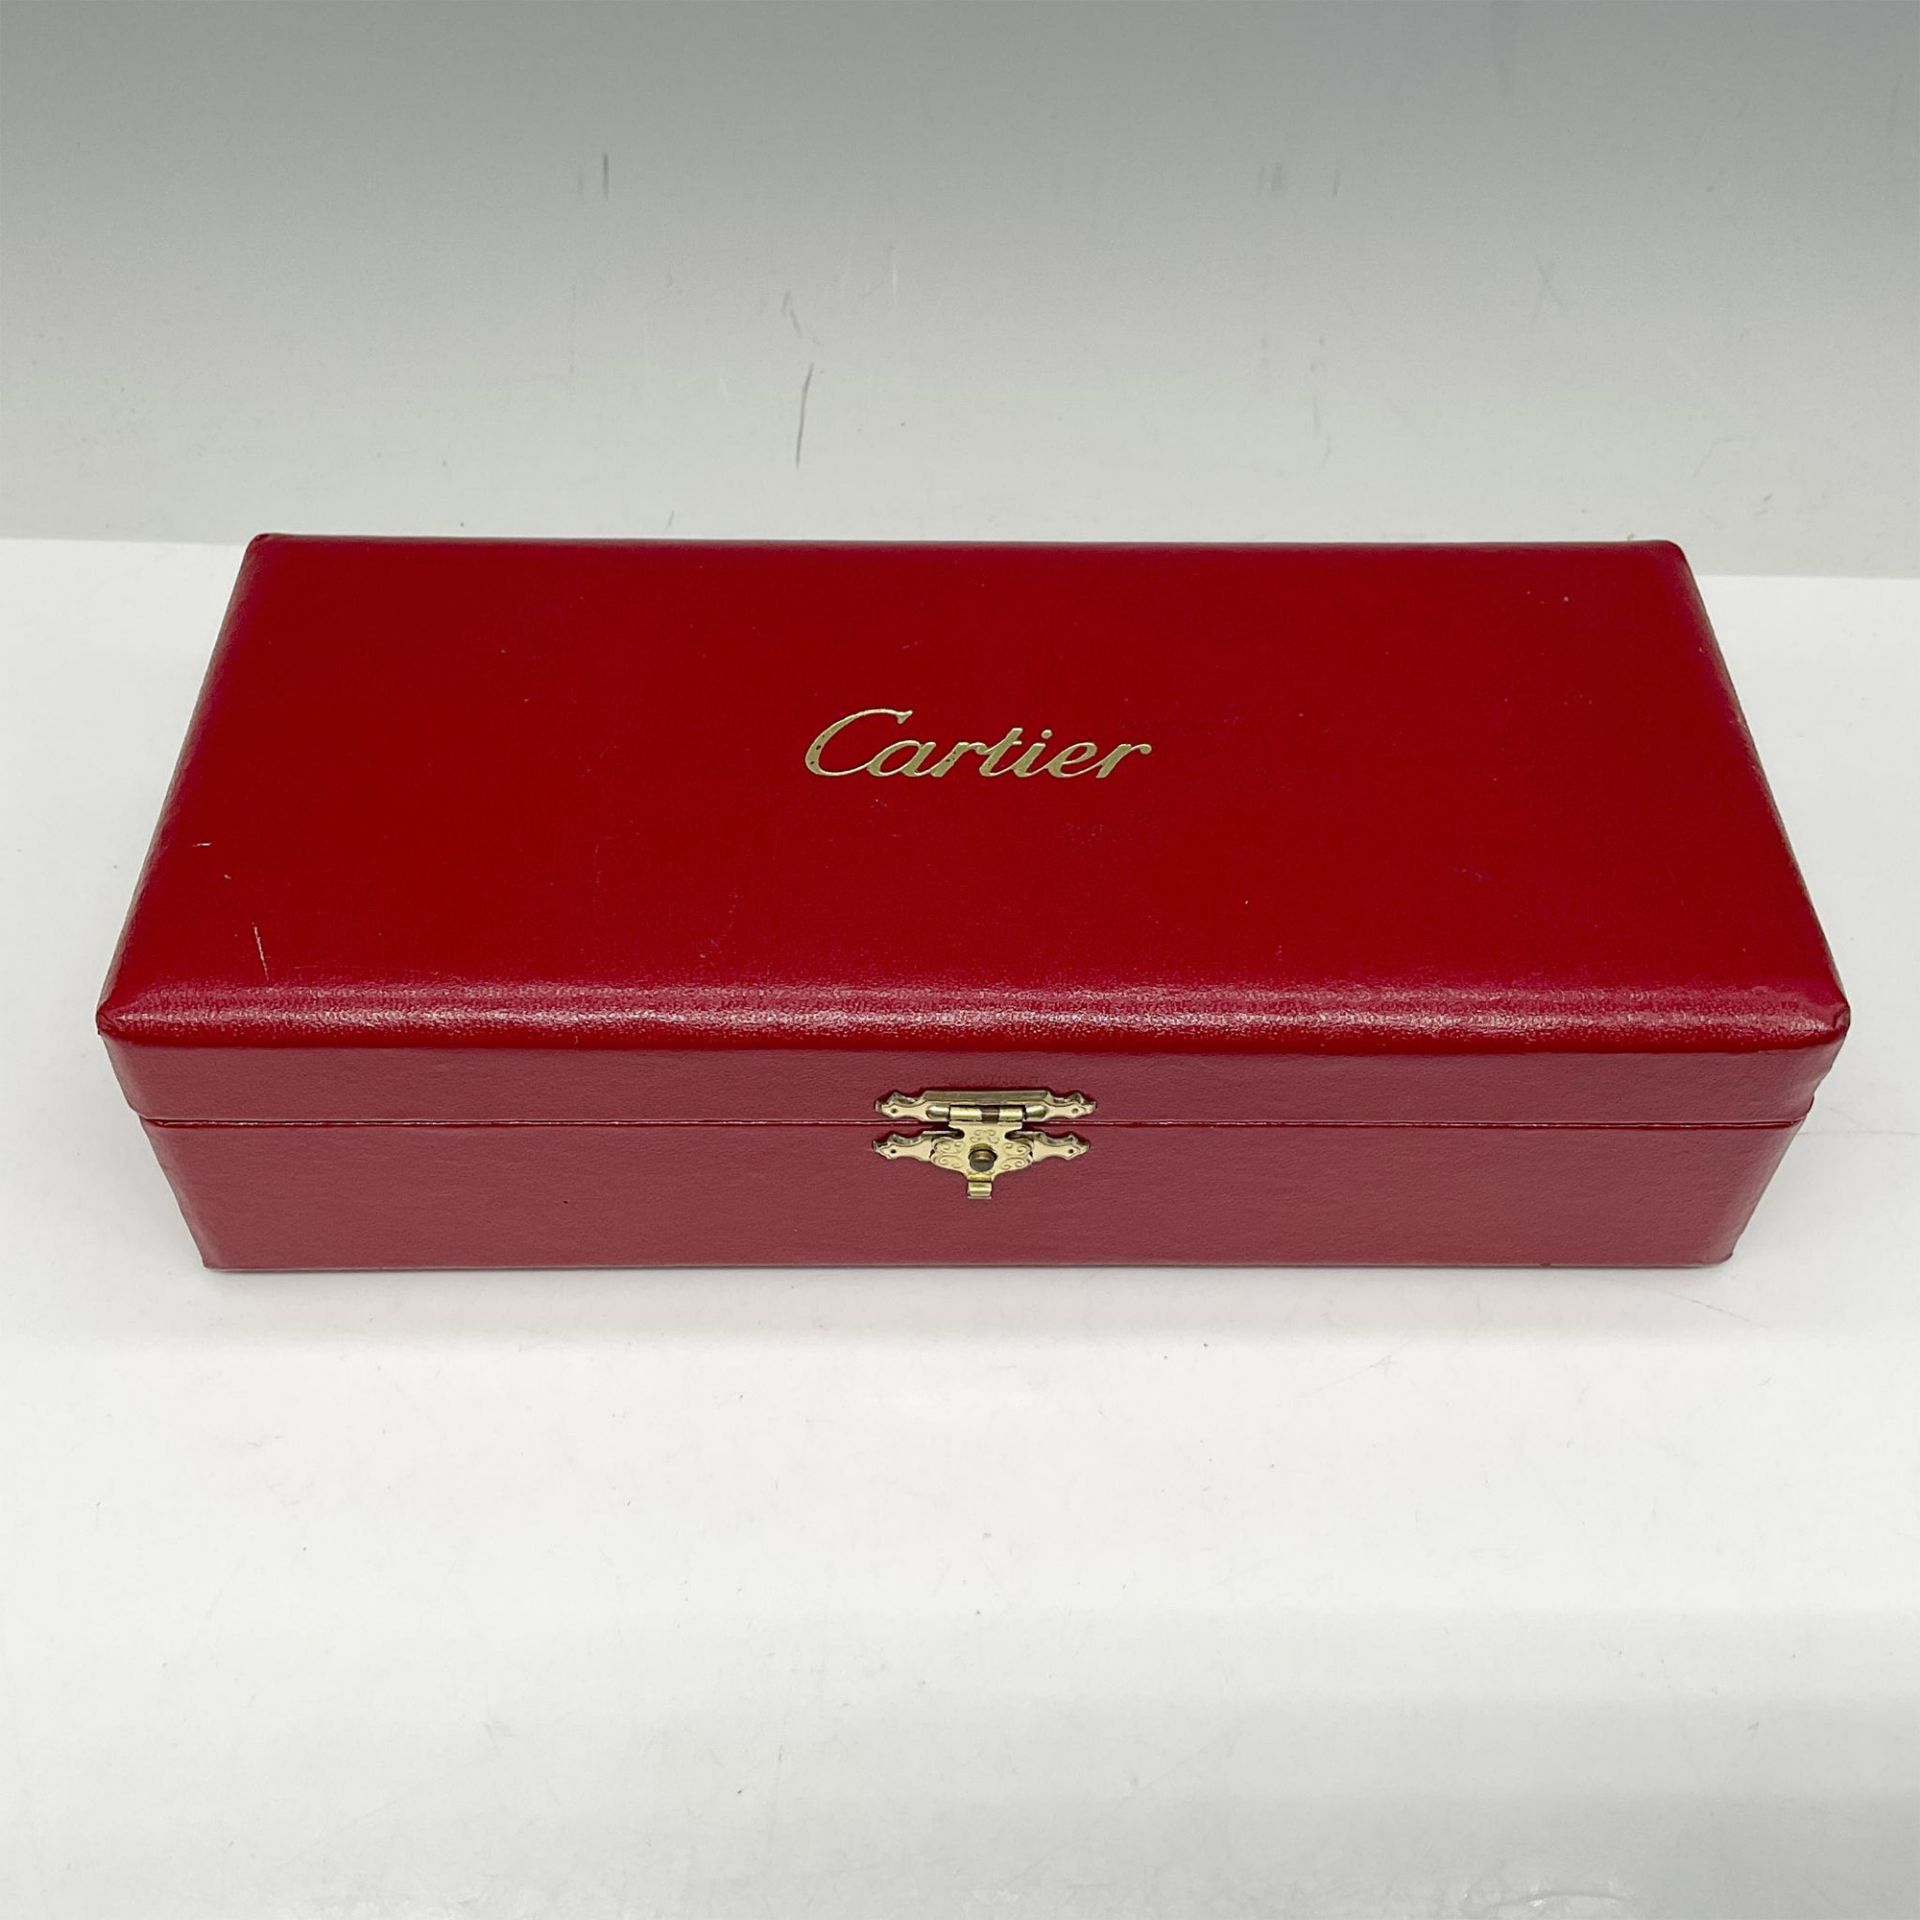 Cartier Sterling Silver Spoon and Fork Set, 4 pieces - Image 3 of 3